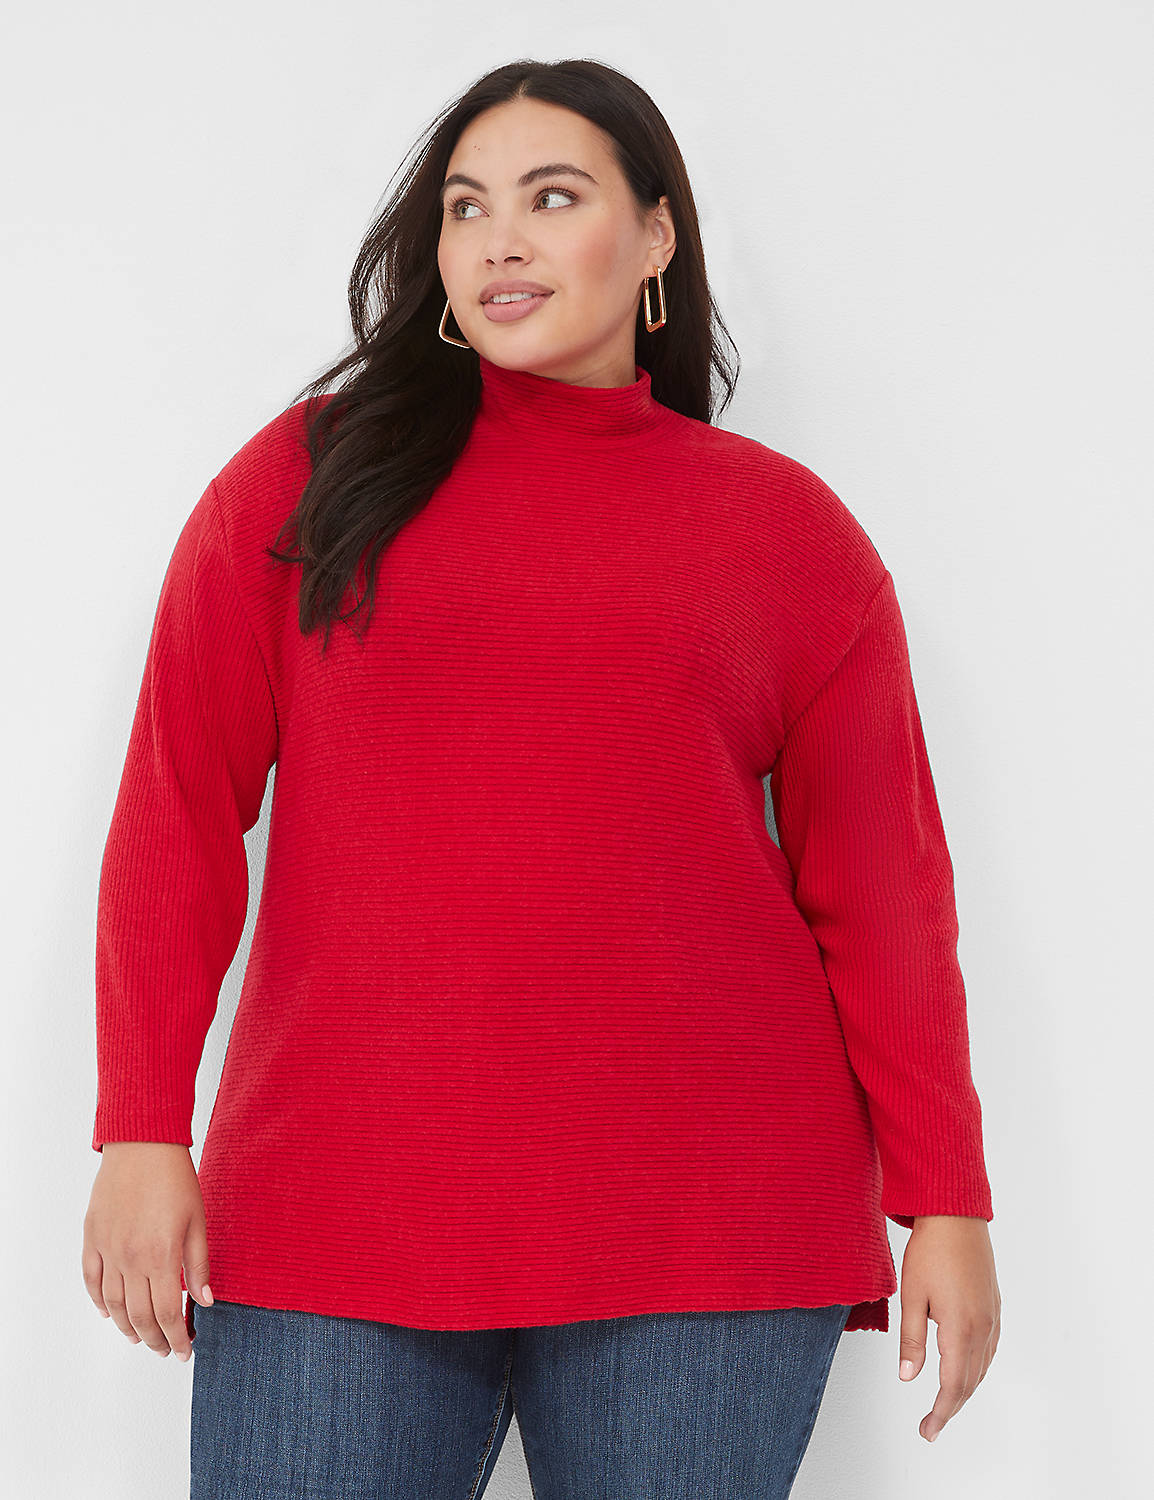 lane bryant relaxed mock-neck rib top 10/12 red